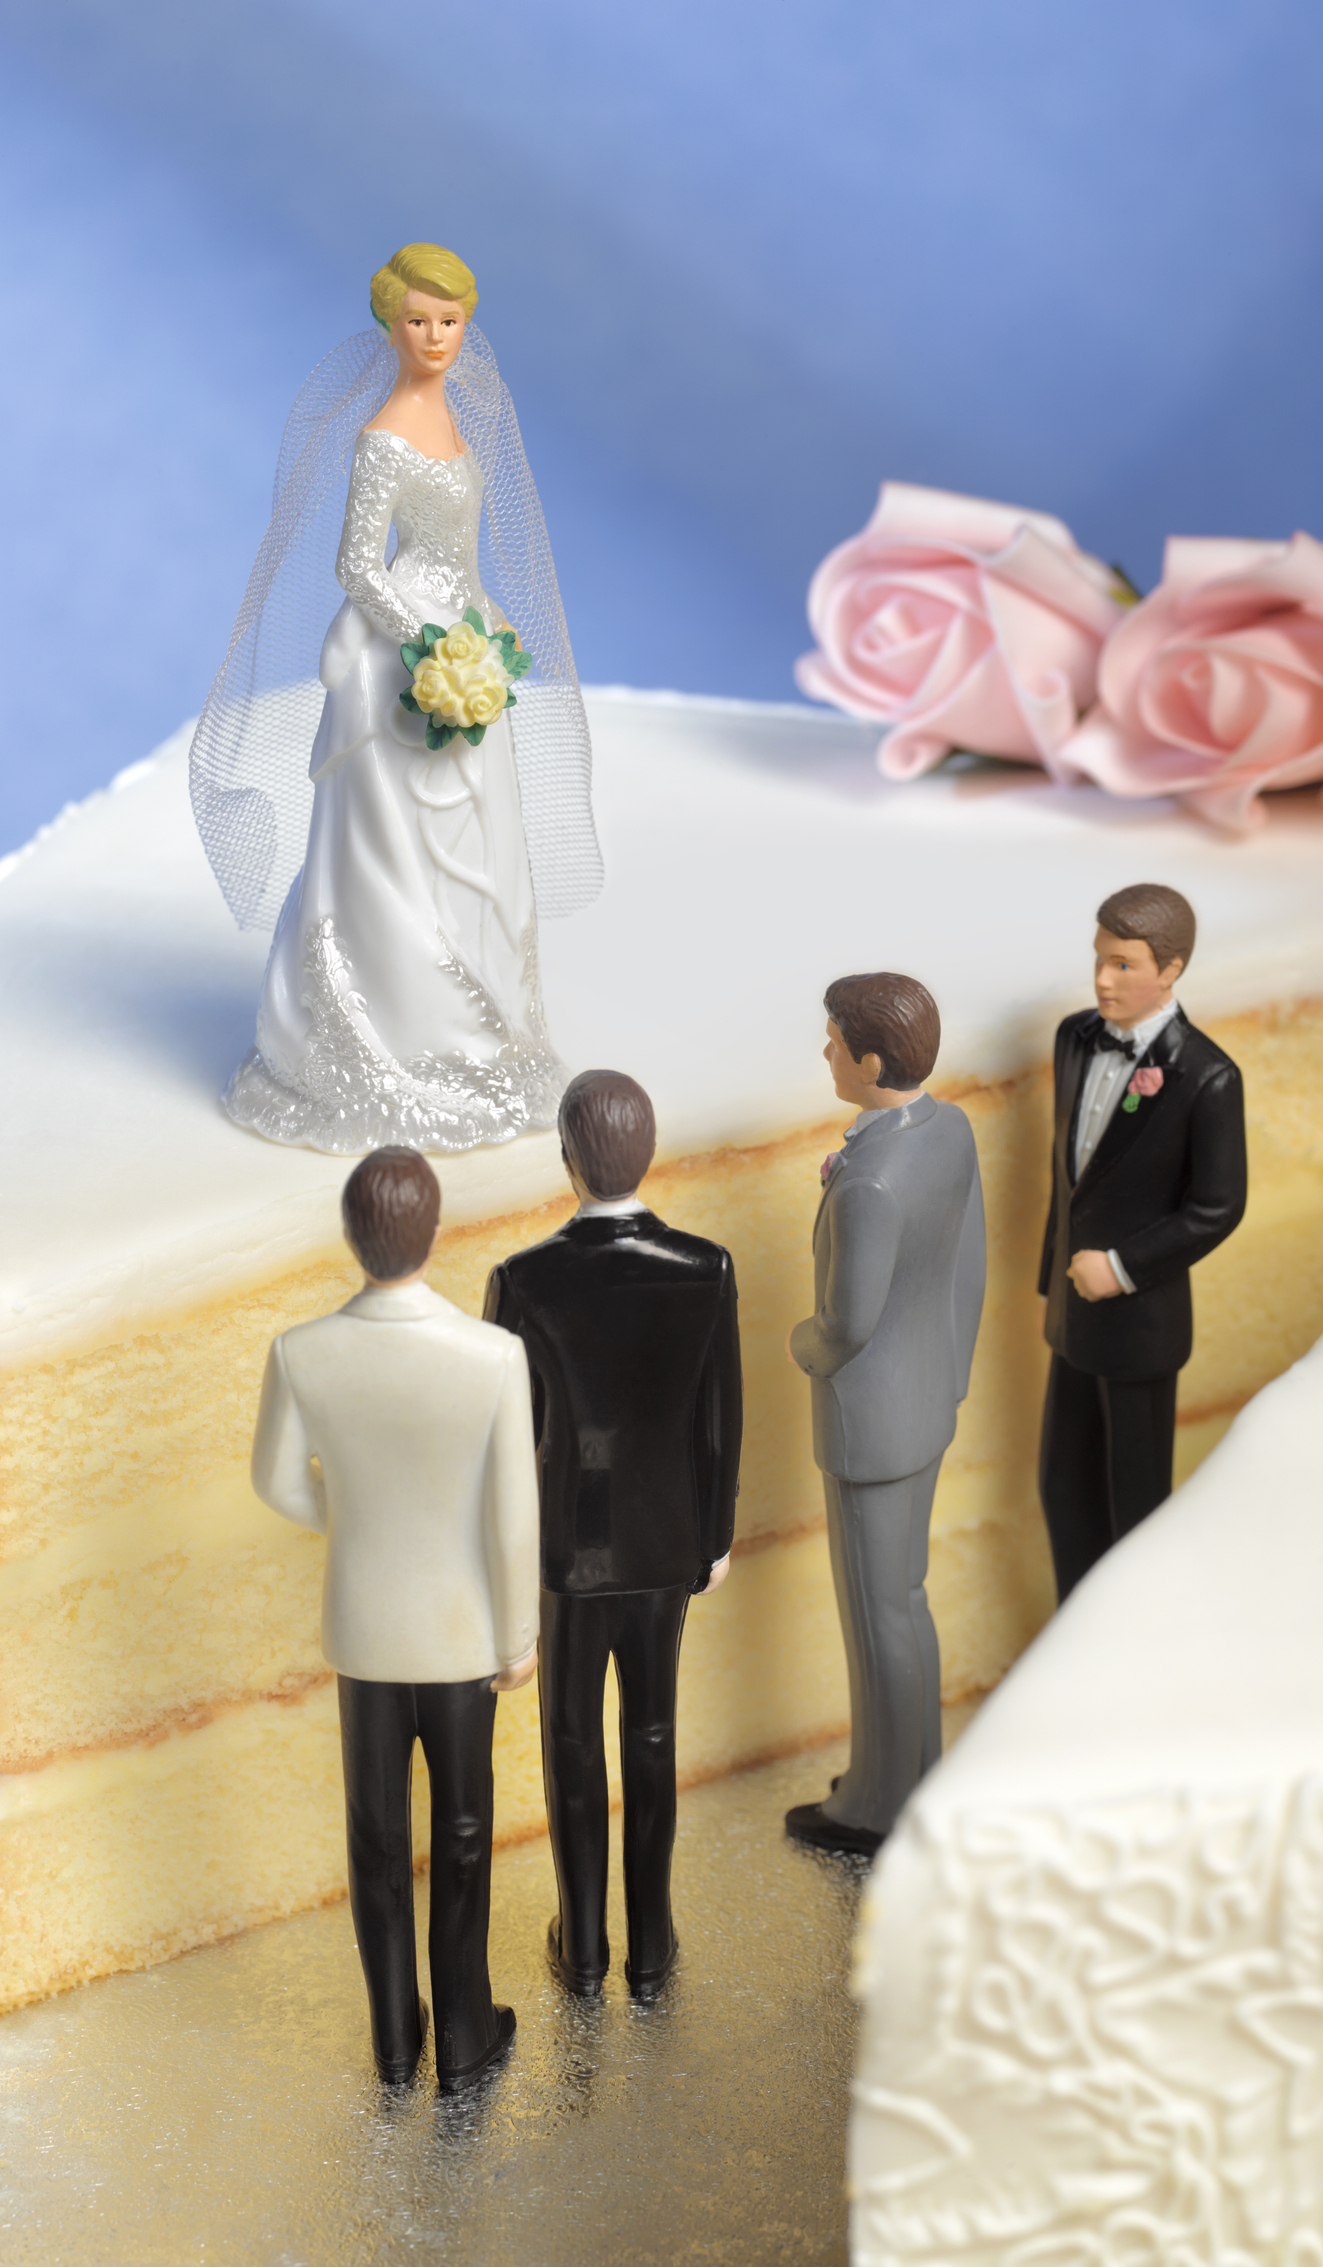 Bride figurine at the top of a cake with three groom figurines below, implying a choice